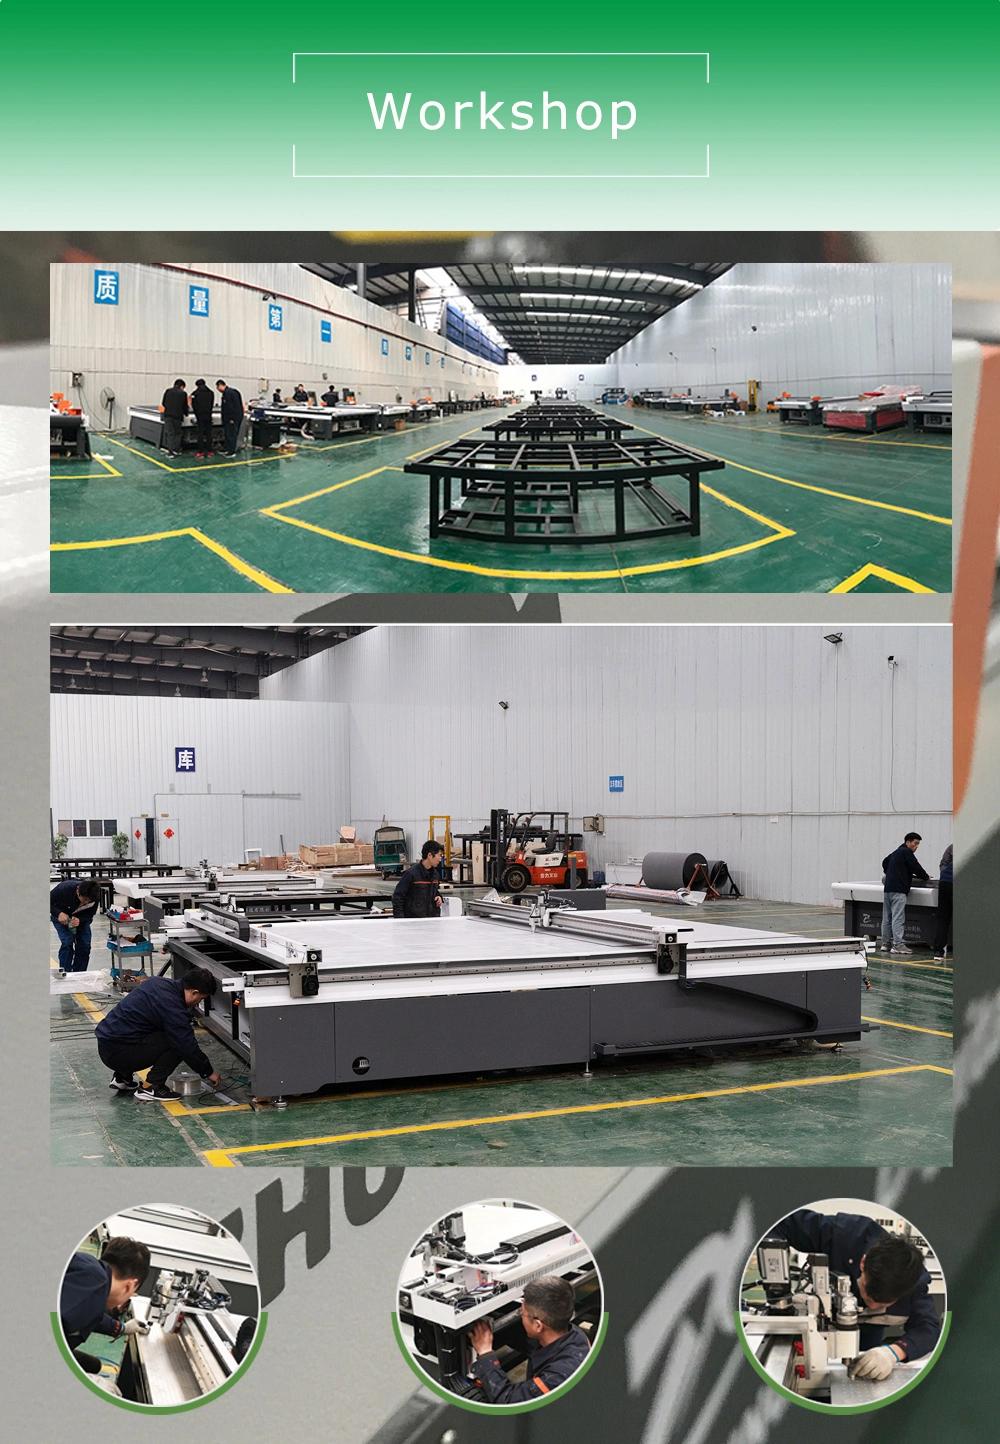 Automatic CNC Wool Felt Cutting Machine Thick Woolen Cut for Acoustic Panel Making Digital Cutter Make Dumboard with V Shape Grooving Effects Sound Insulation